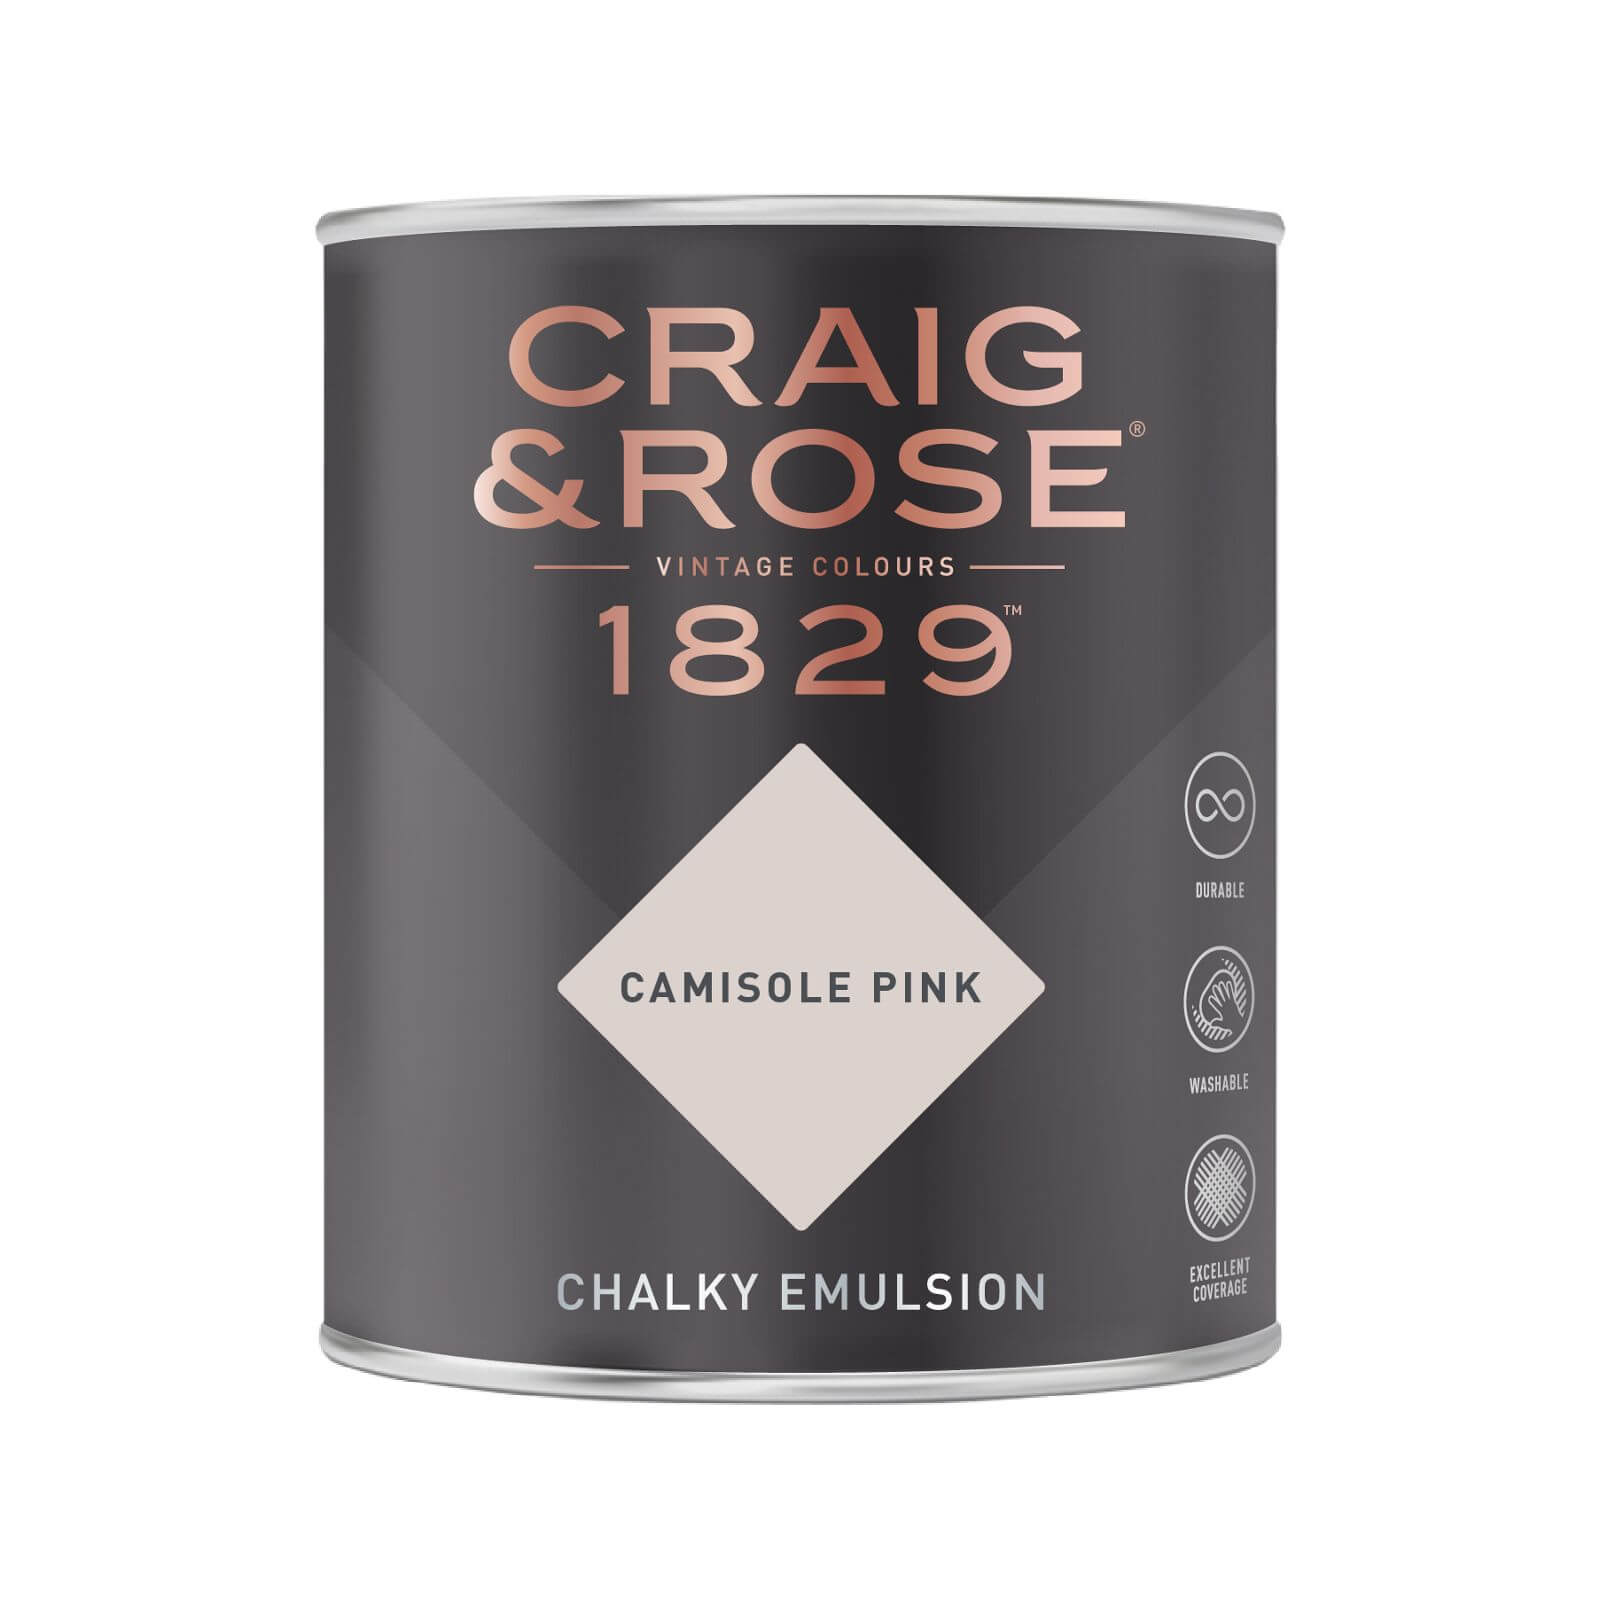 Craig & Rose 1829 Chalky Emulsion Paint Camisole Pink - 750ml